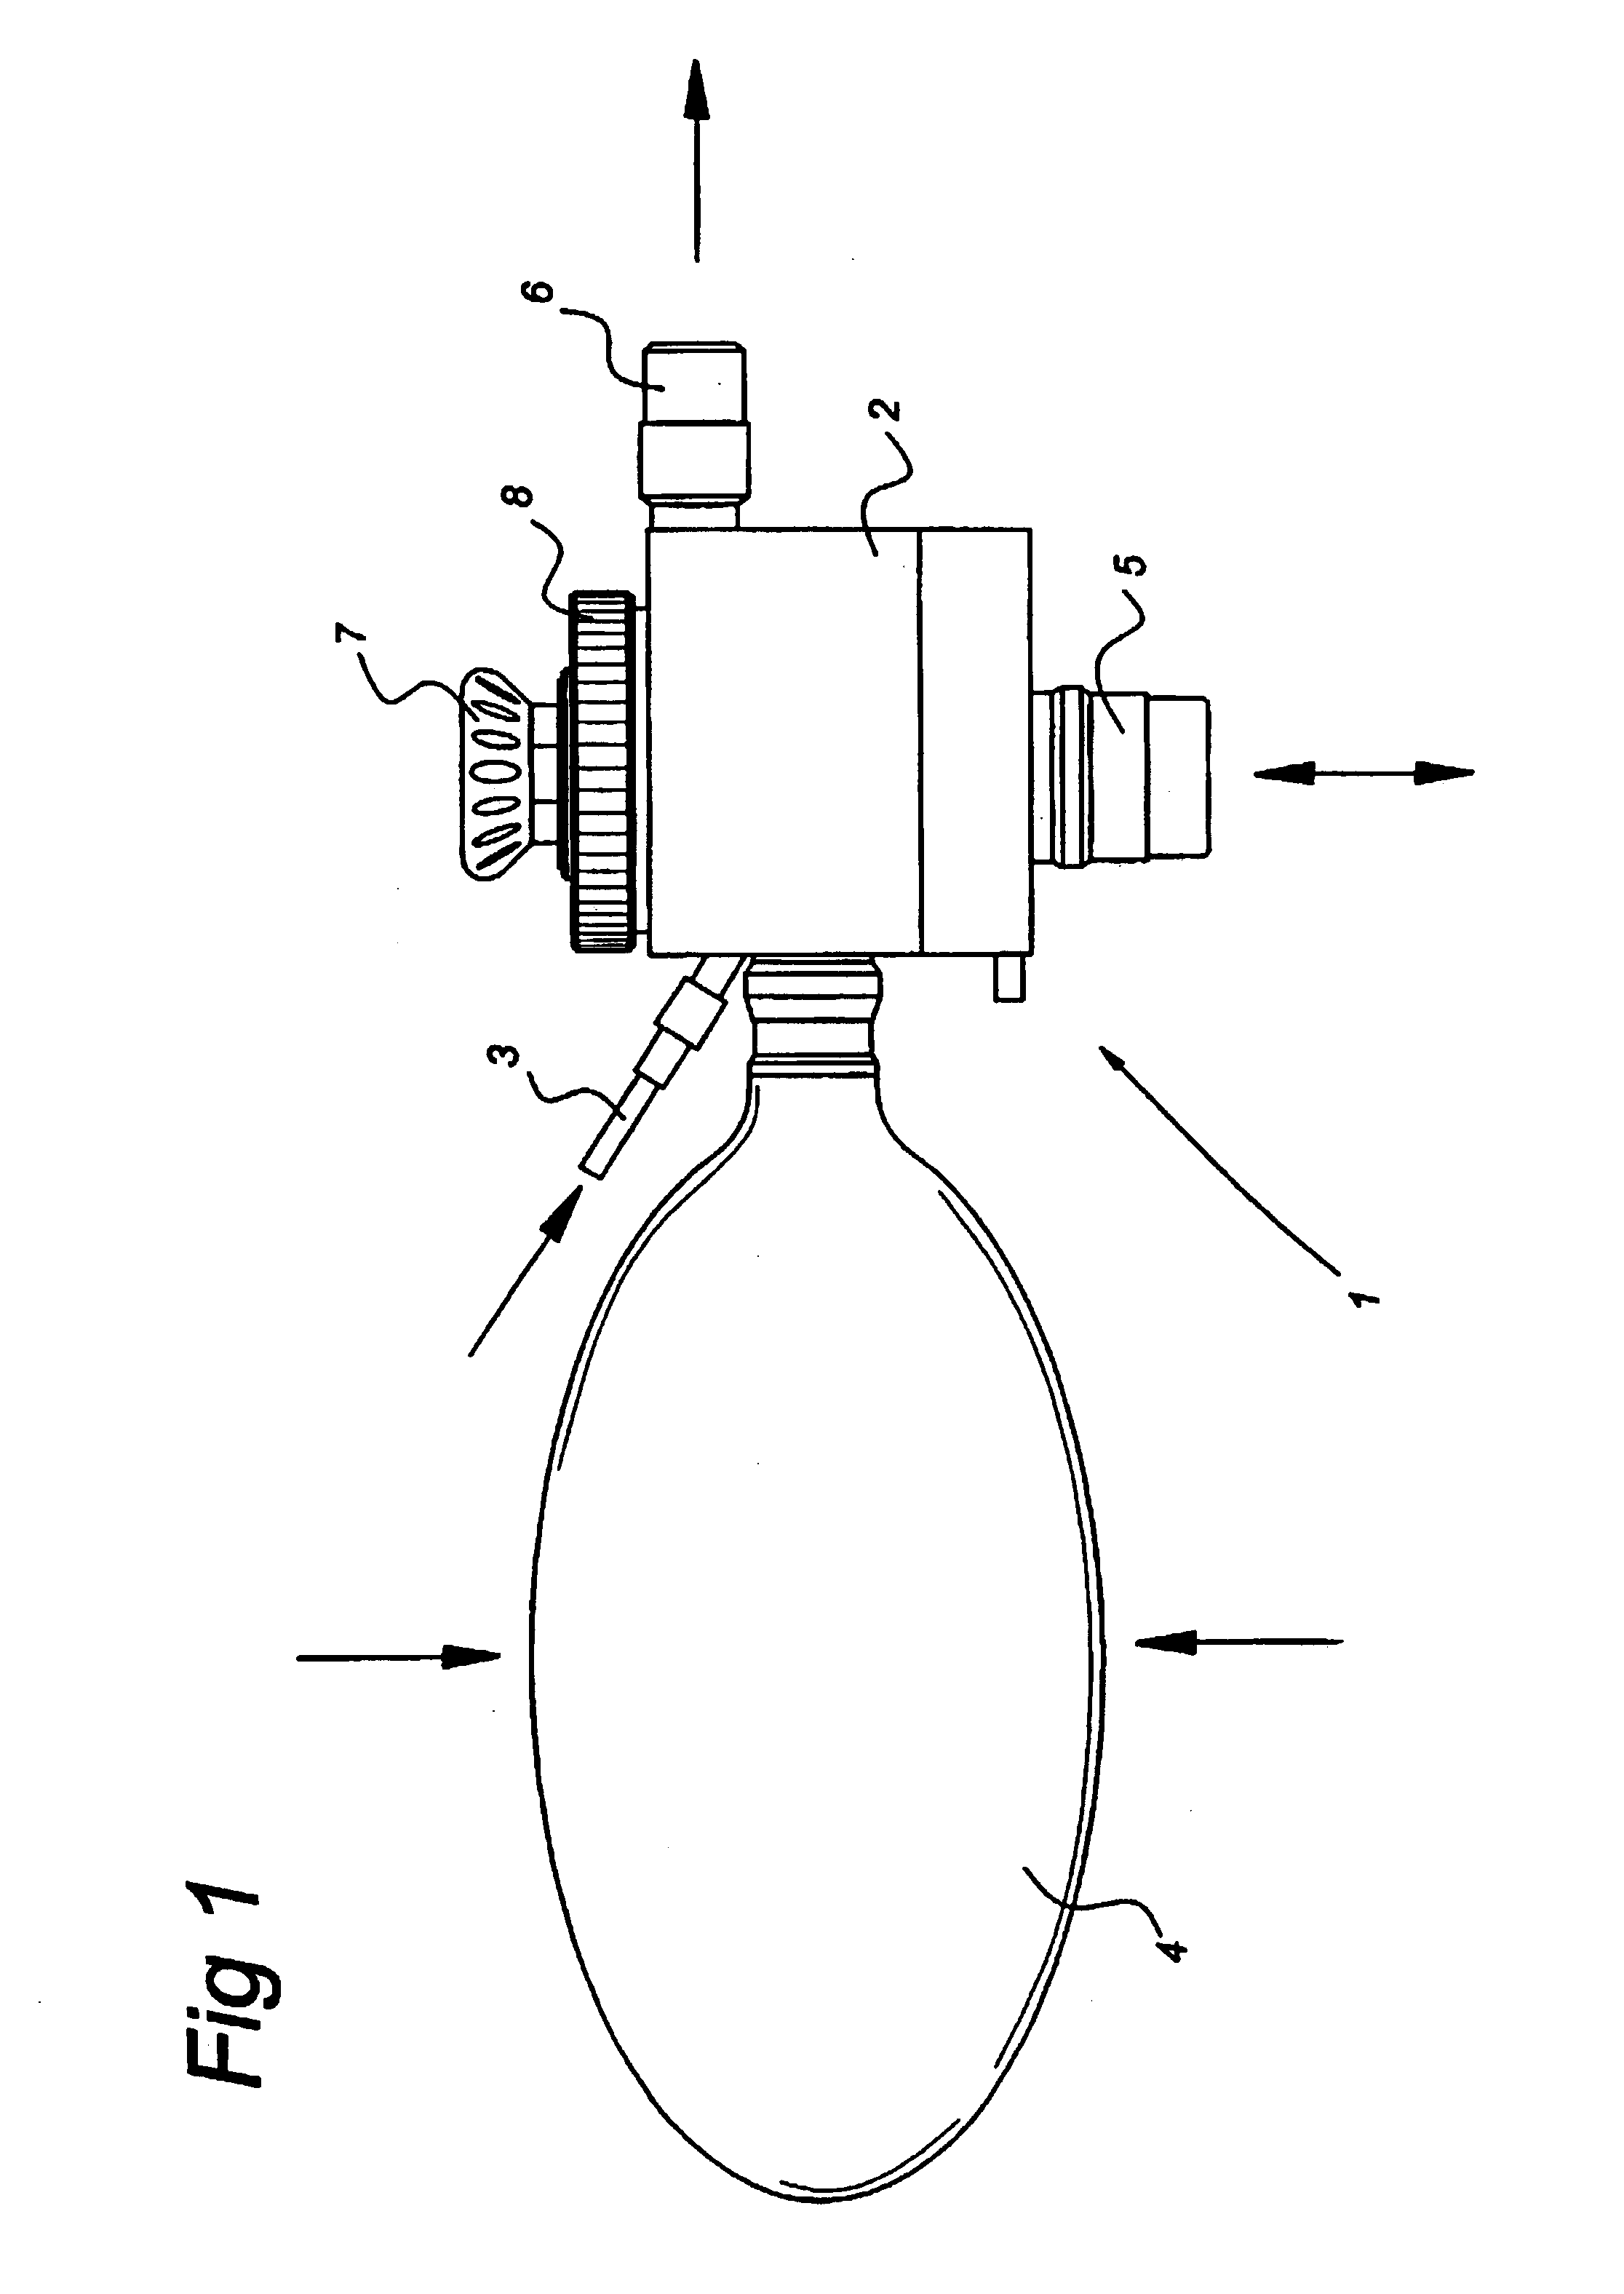 Apparatus for administering a gas to a person or an animal